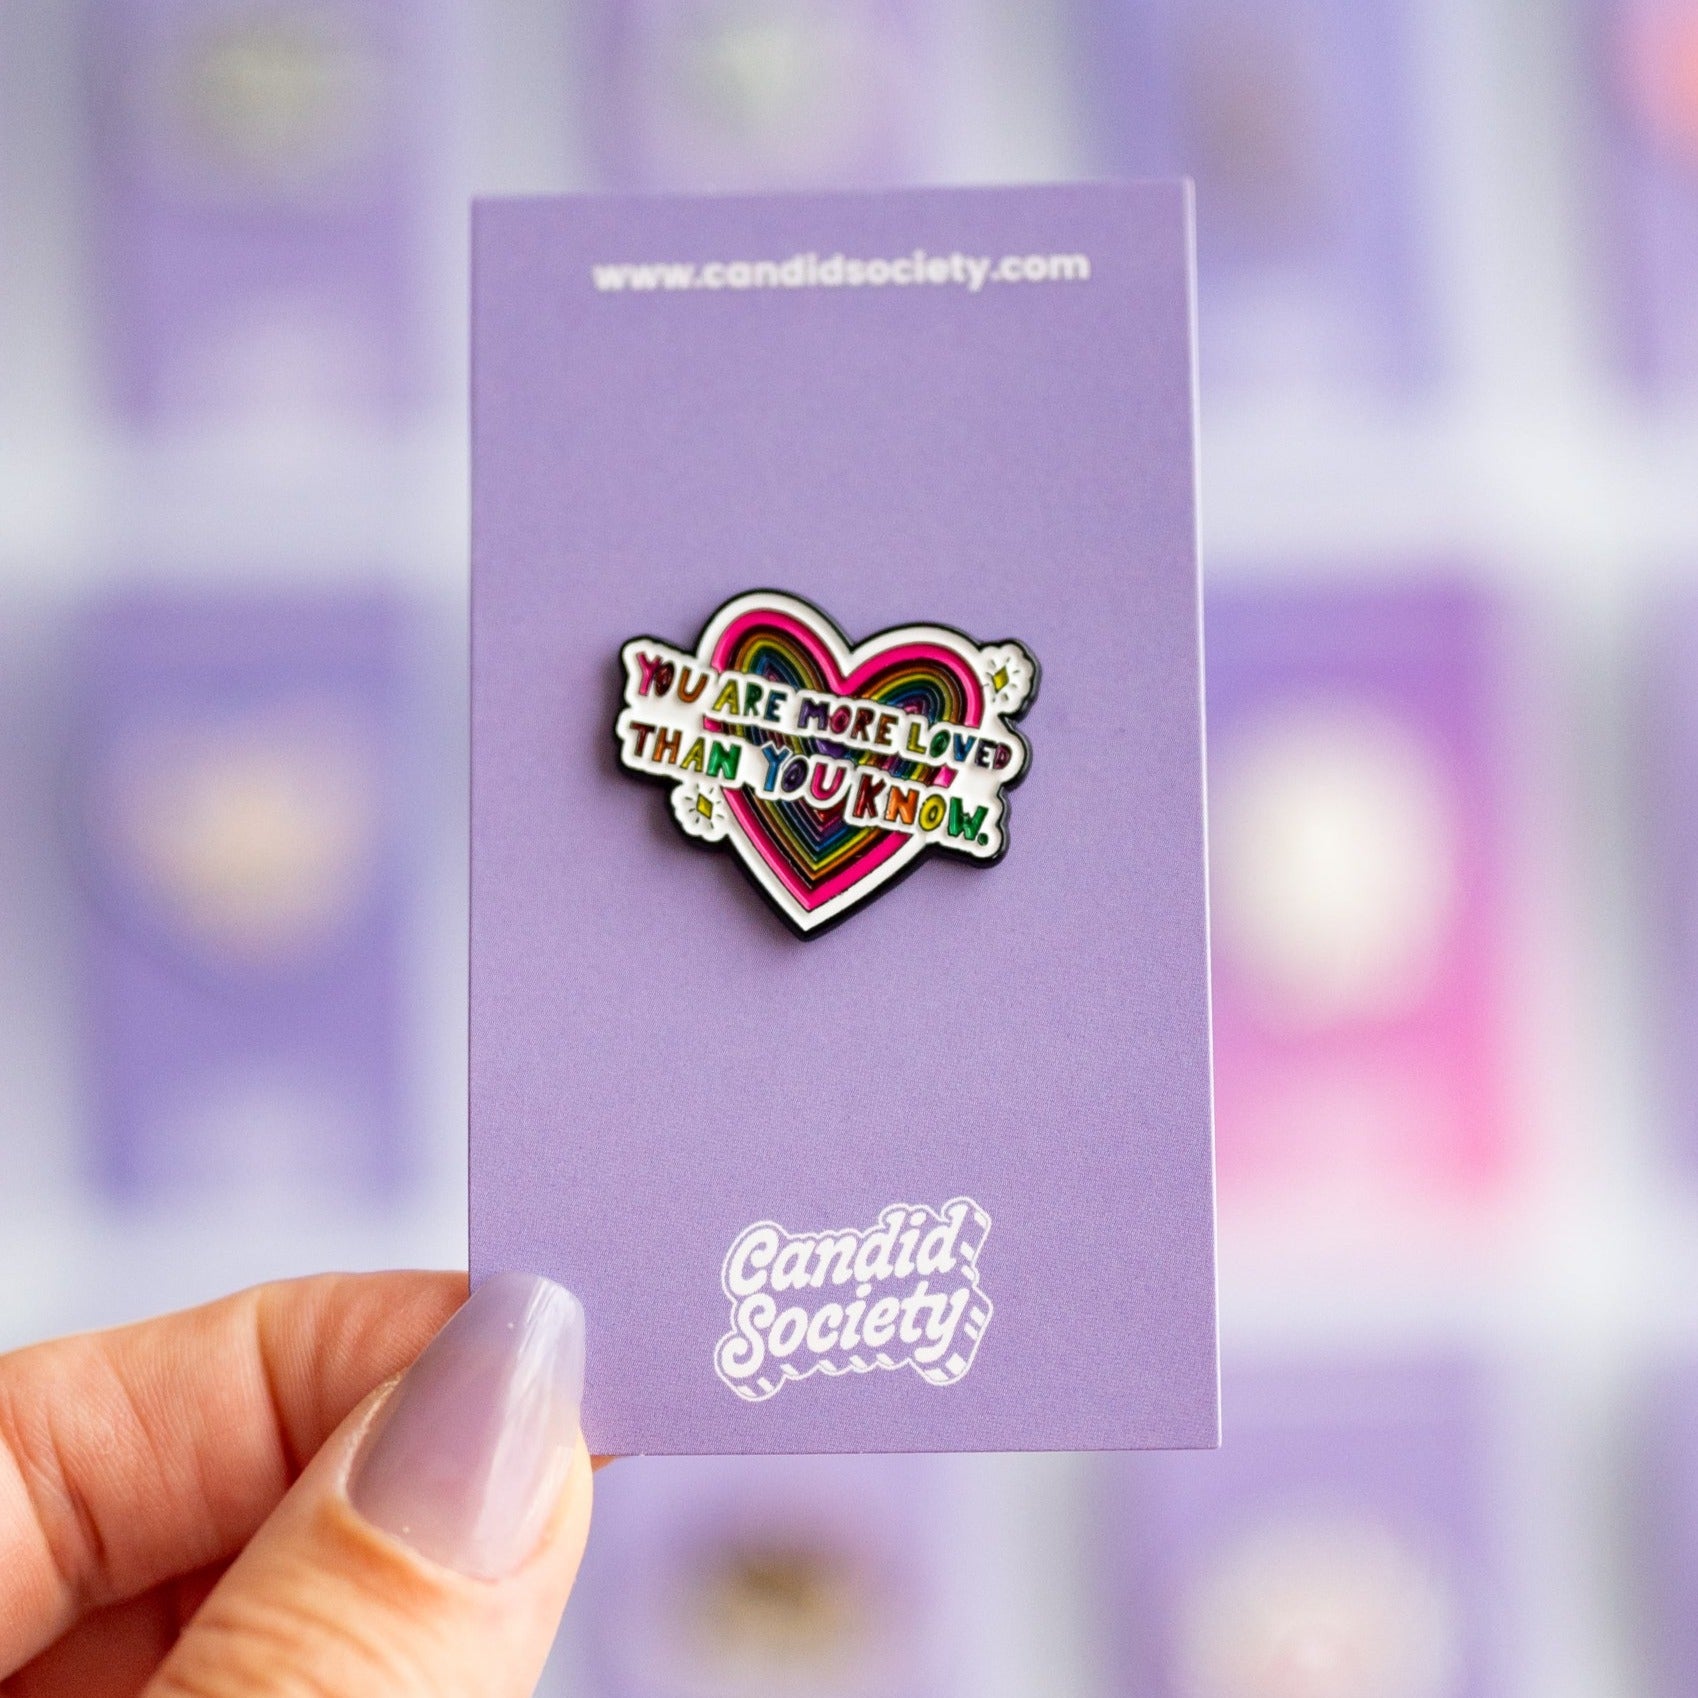 You are more loved than you know - Enamel Pin